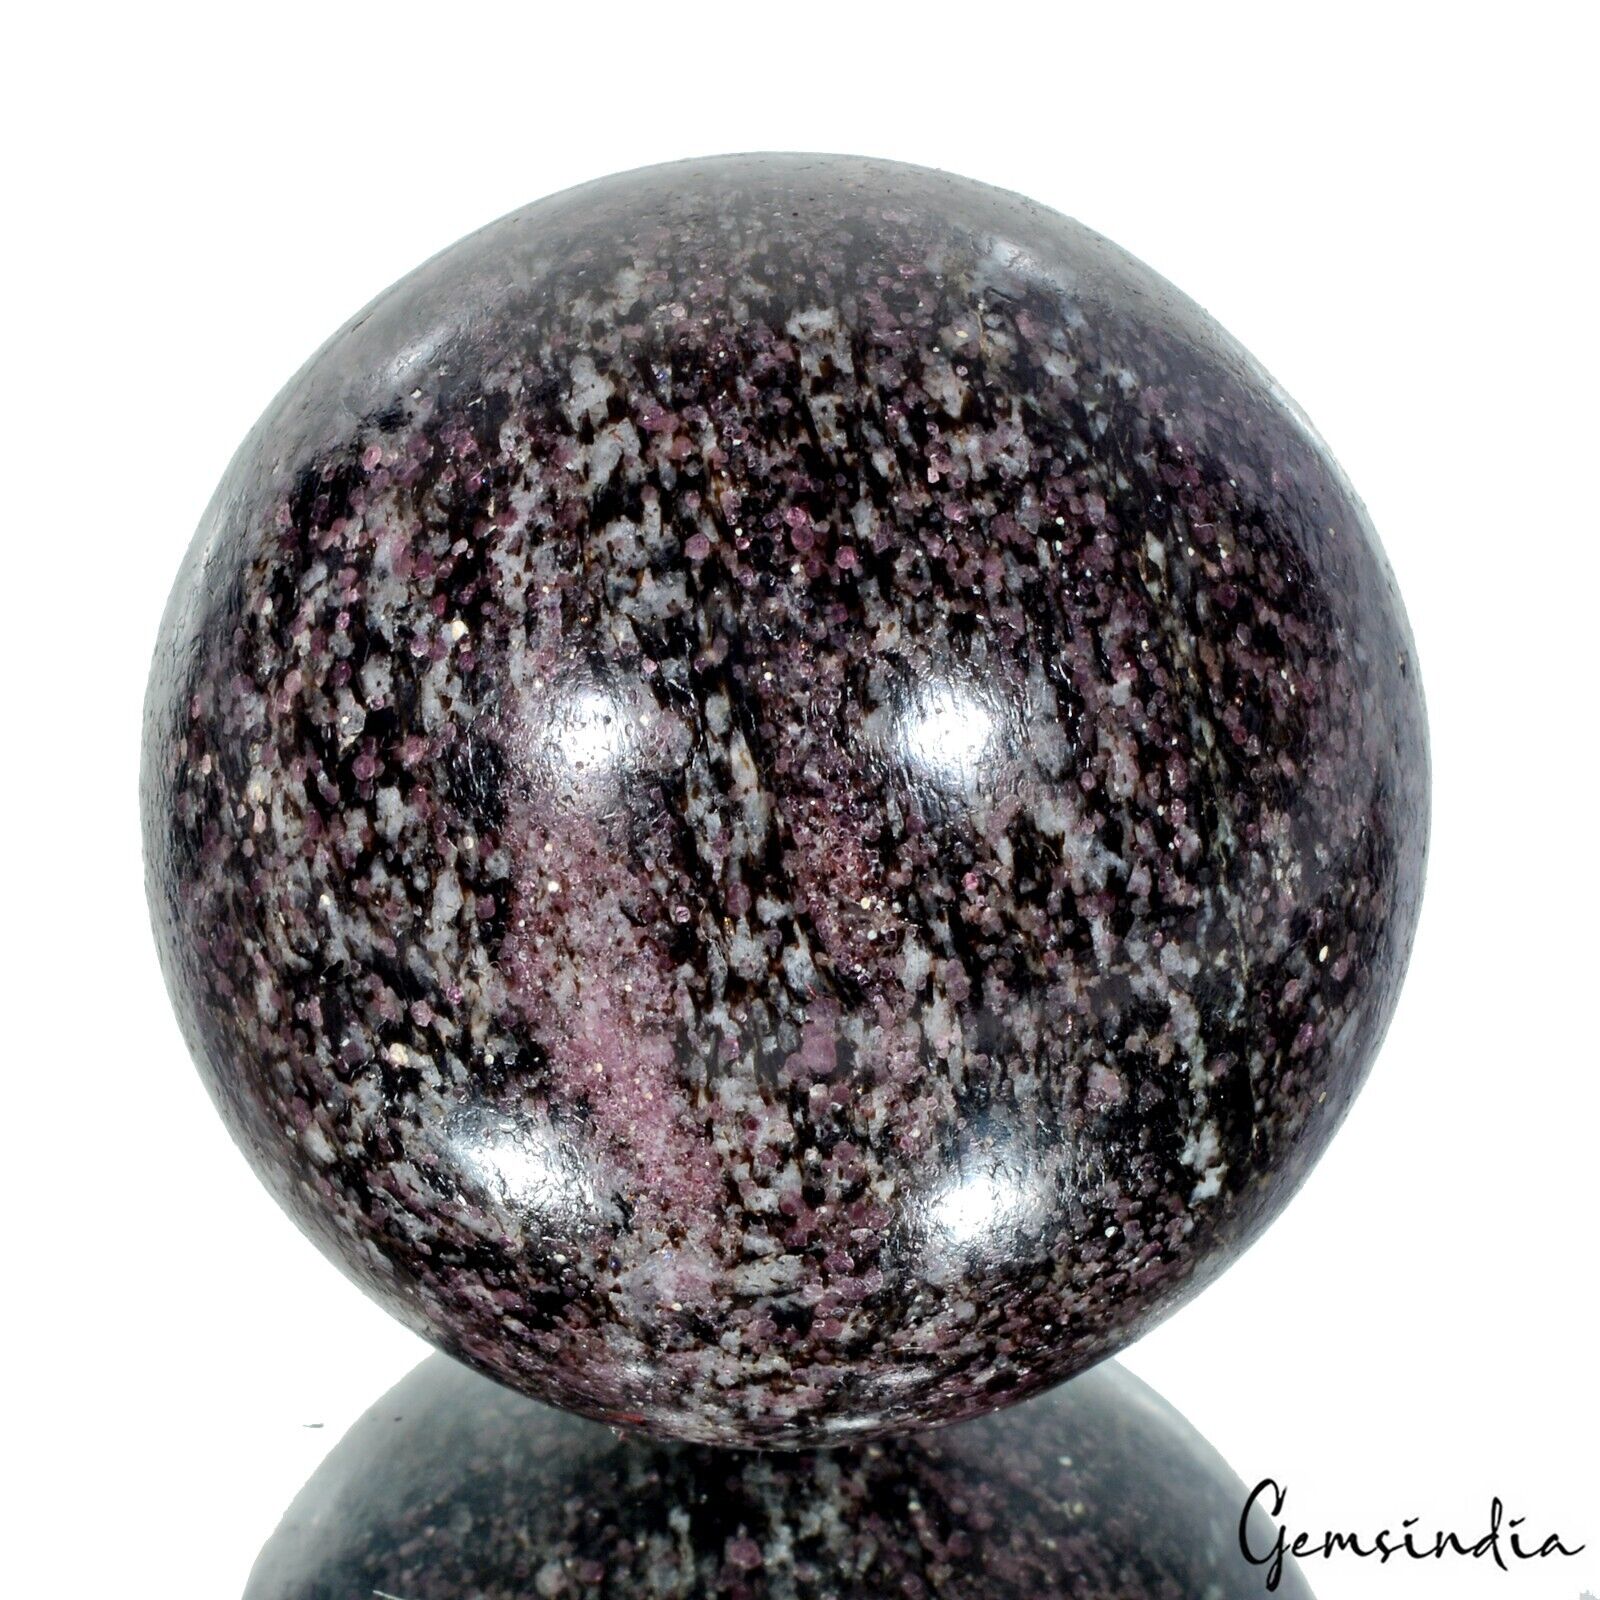 53mm Pink Ruby in Spinel Crystal Healing Reiki Gemstone Decor Sphere 1280 Cts